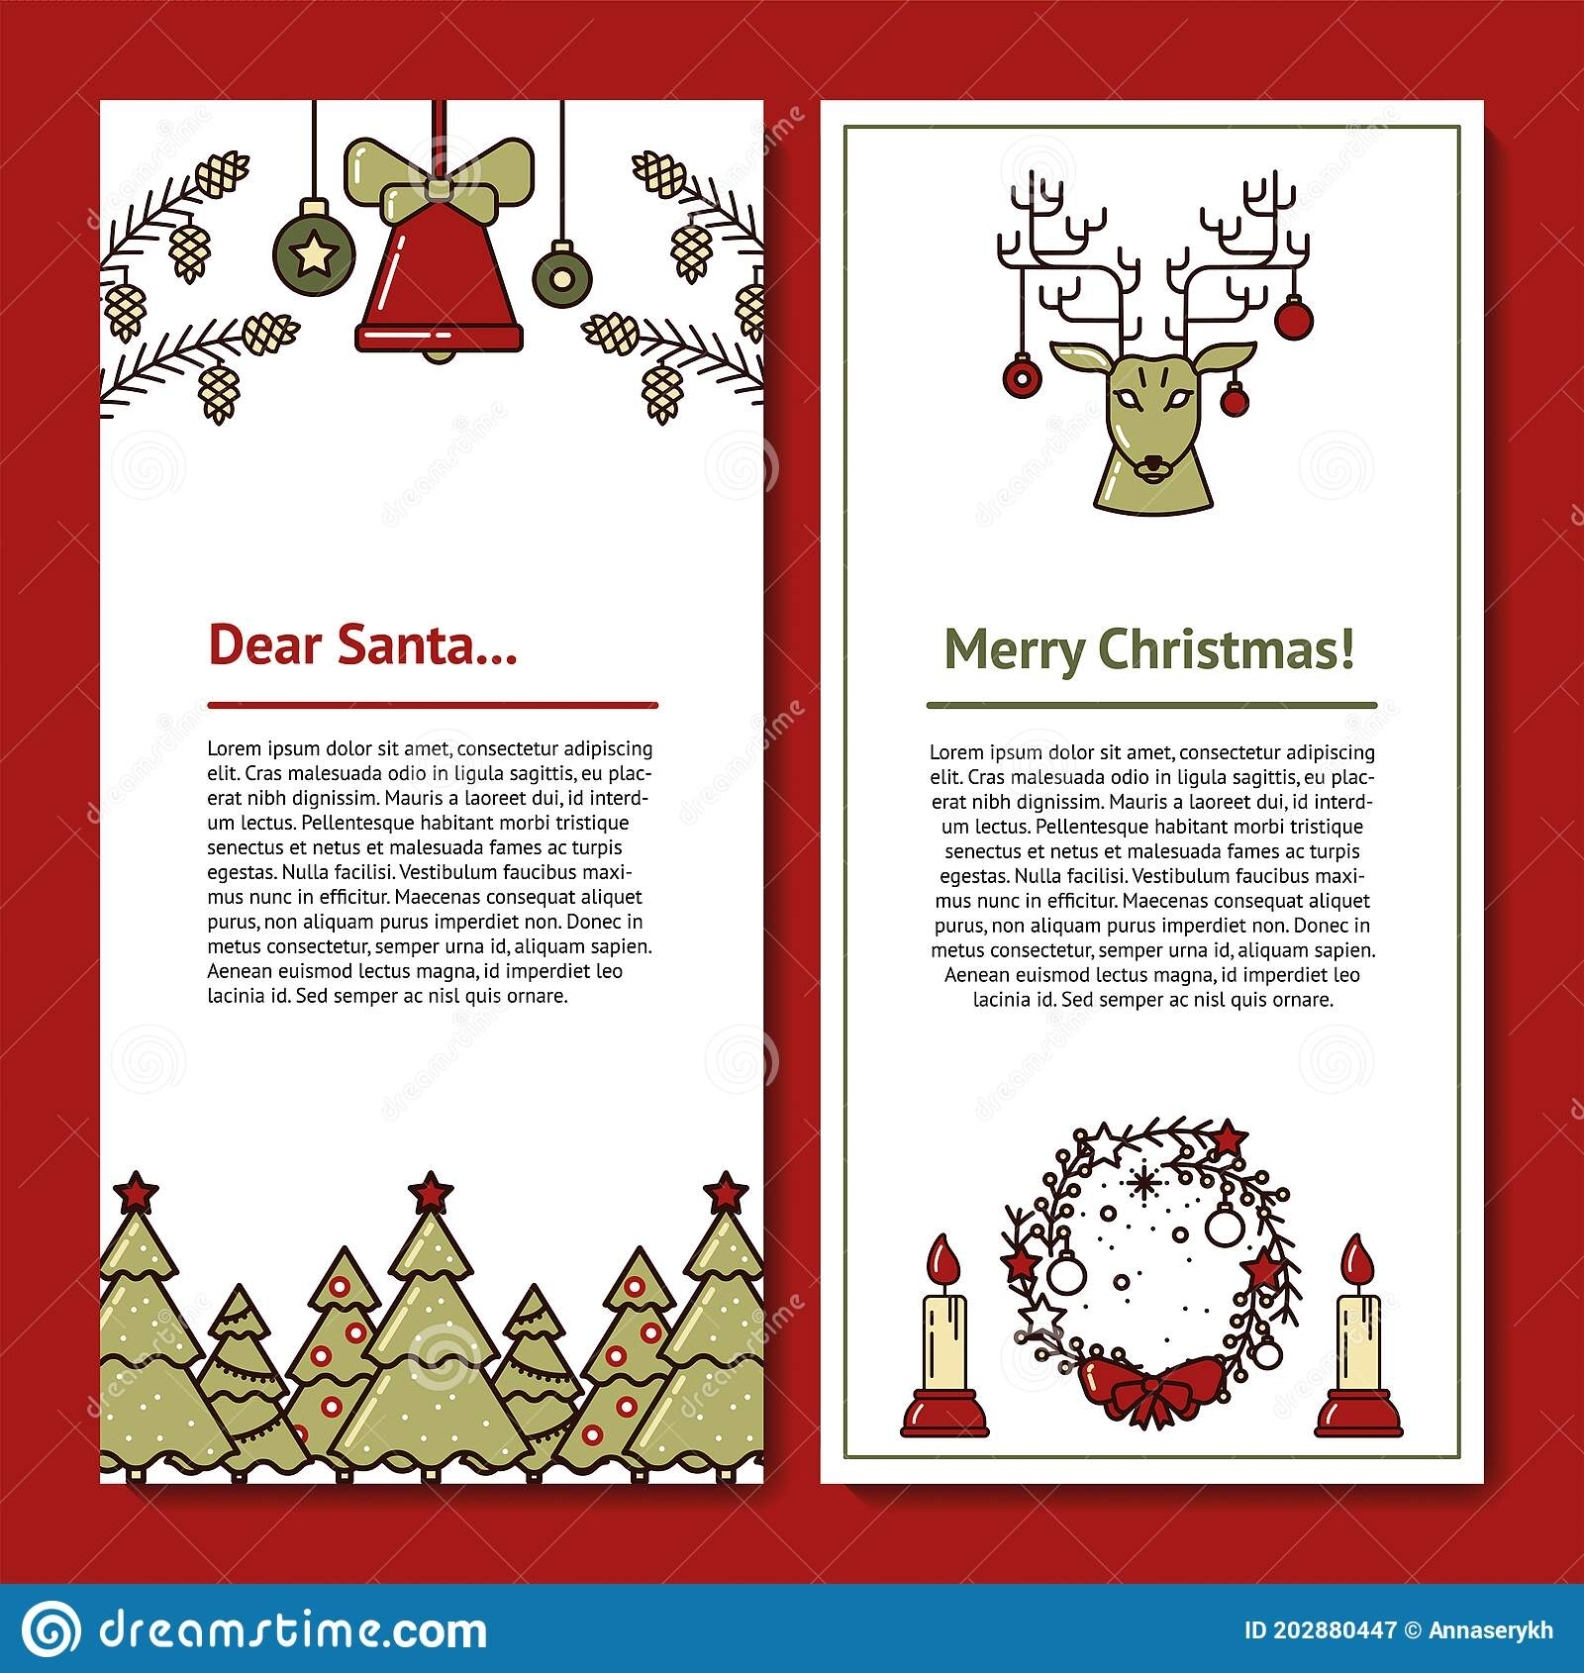 Paper Design Template For Santa Claus, Christmas Mail. Letterhead With within Santa Claus Letterhead Template